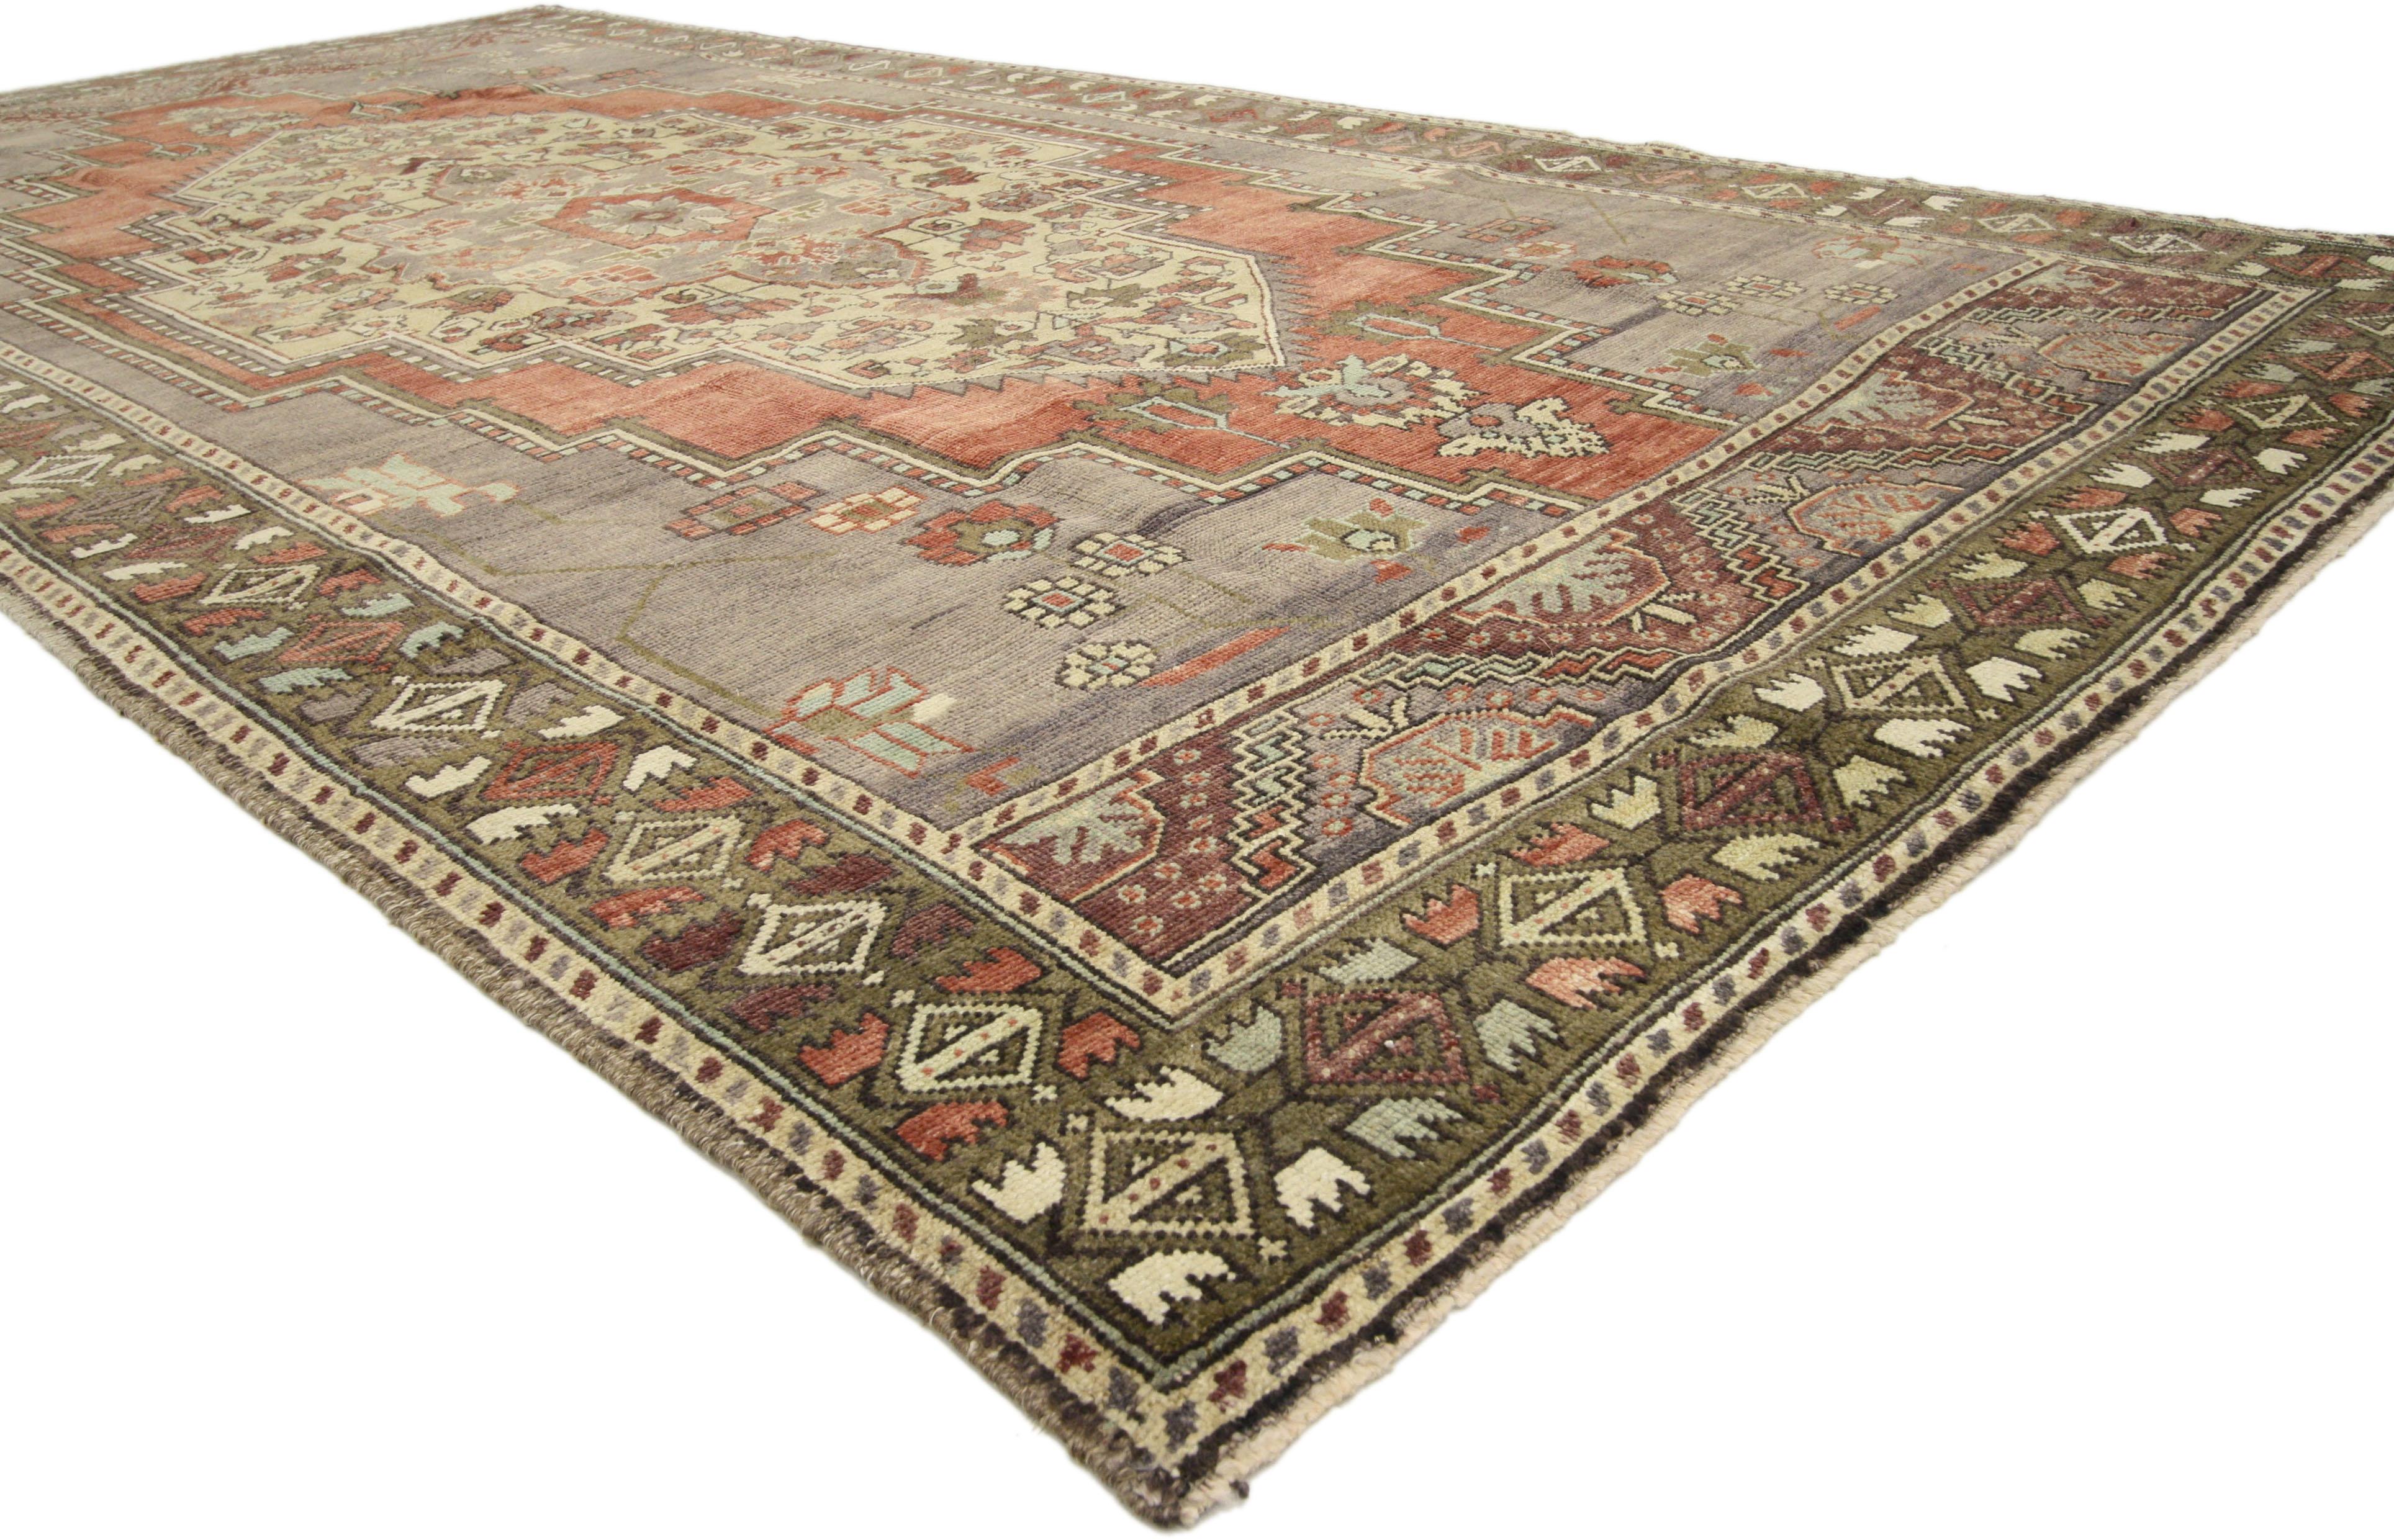 51359, vintage Turkish Oushak rug with Traditional style, Wide Hallway runner. Hand knotted wool Turkish Oushak area rug features a center medallion surrounded by geometric motifs in an open red and gray stepped cut-out field with rich waves of